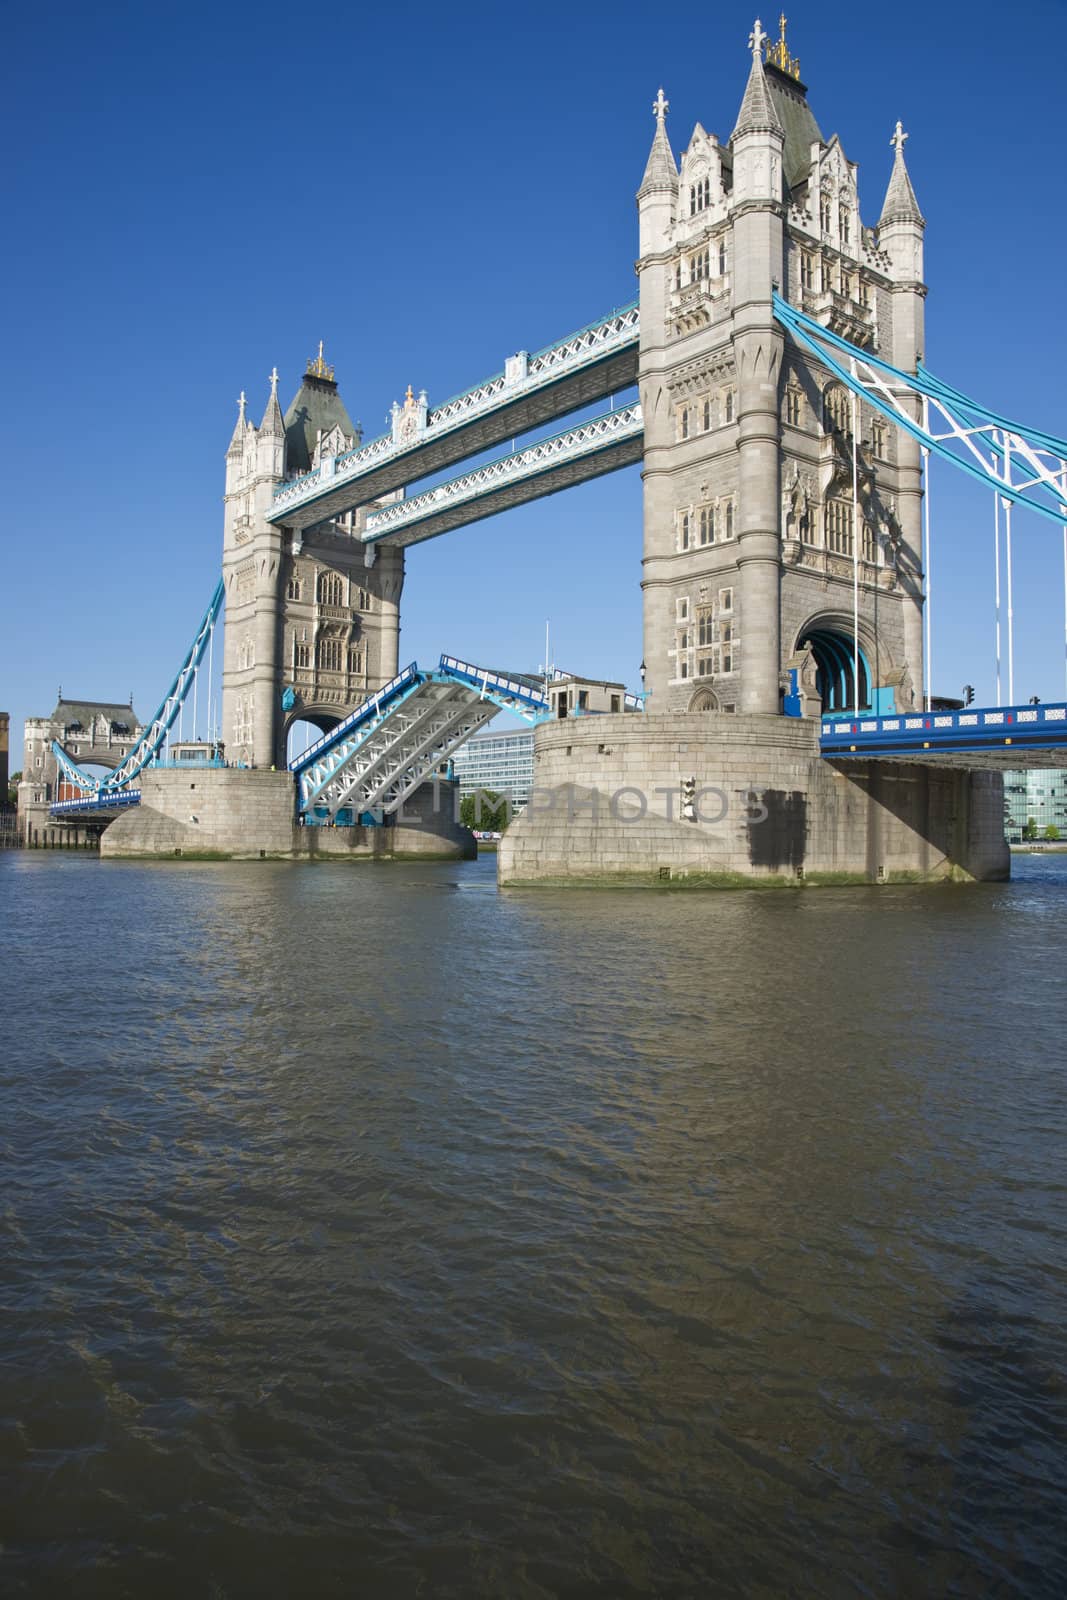 Tower Bridge in open position to allow passage of ships and boats. Historic bridge across the River Thames in London, England